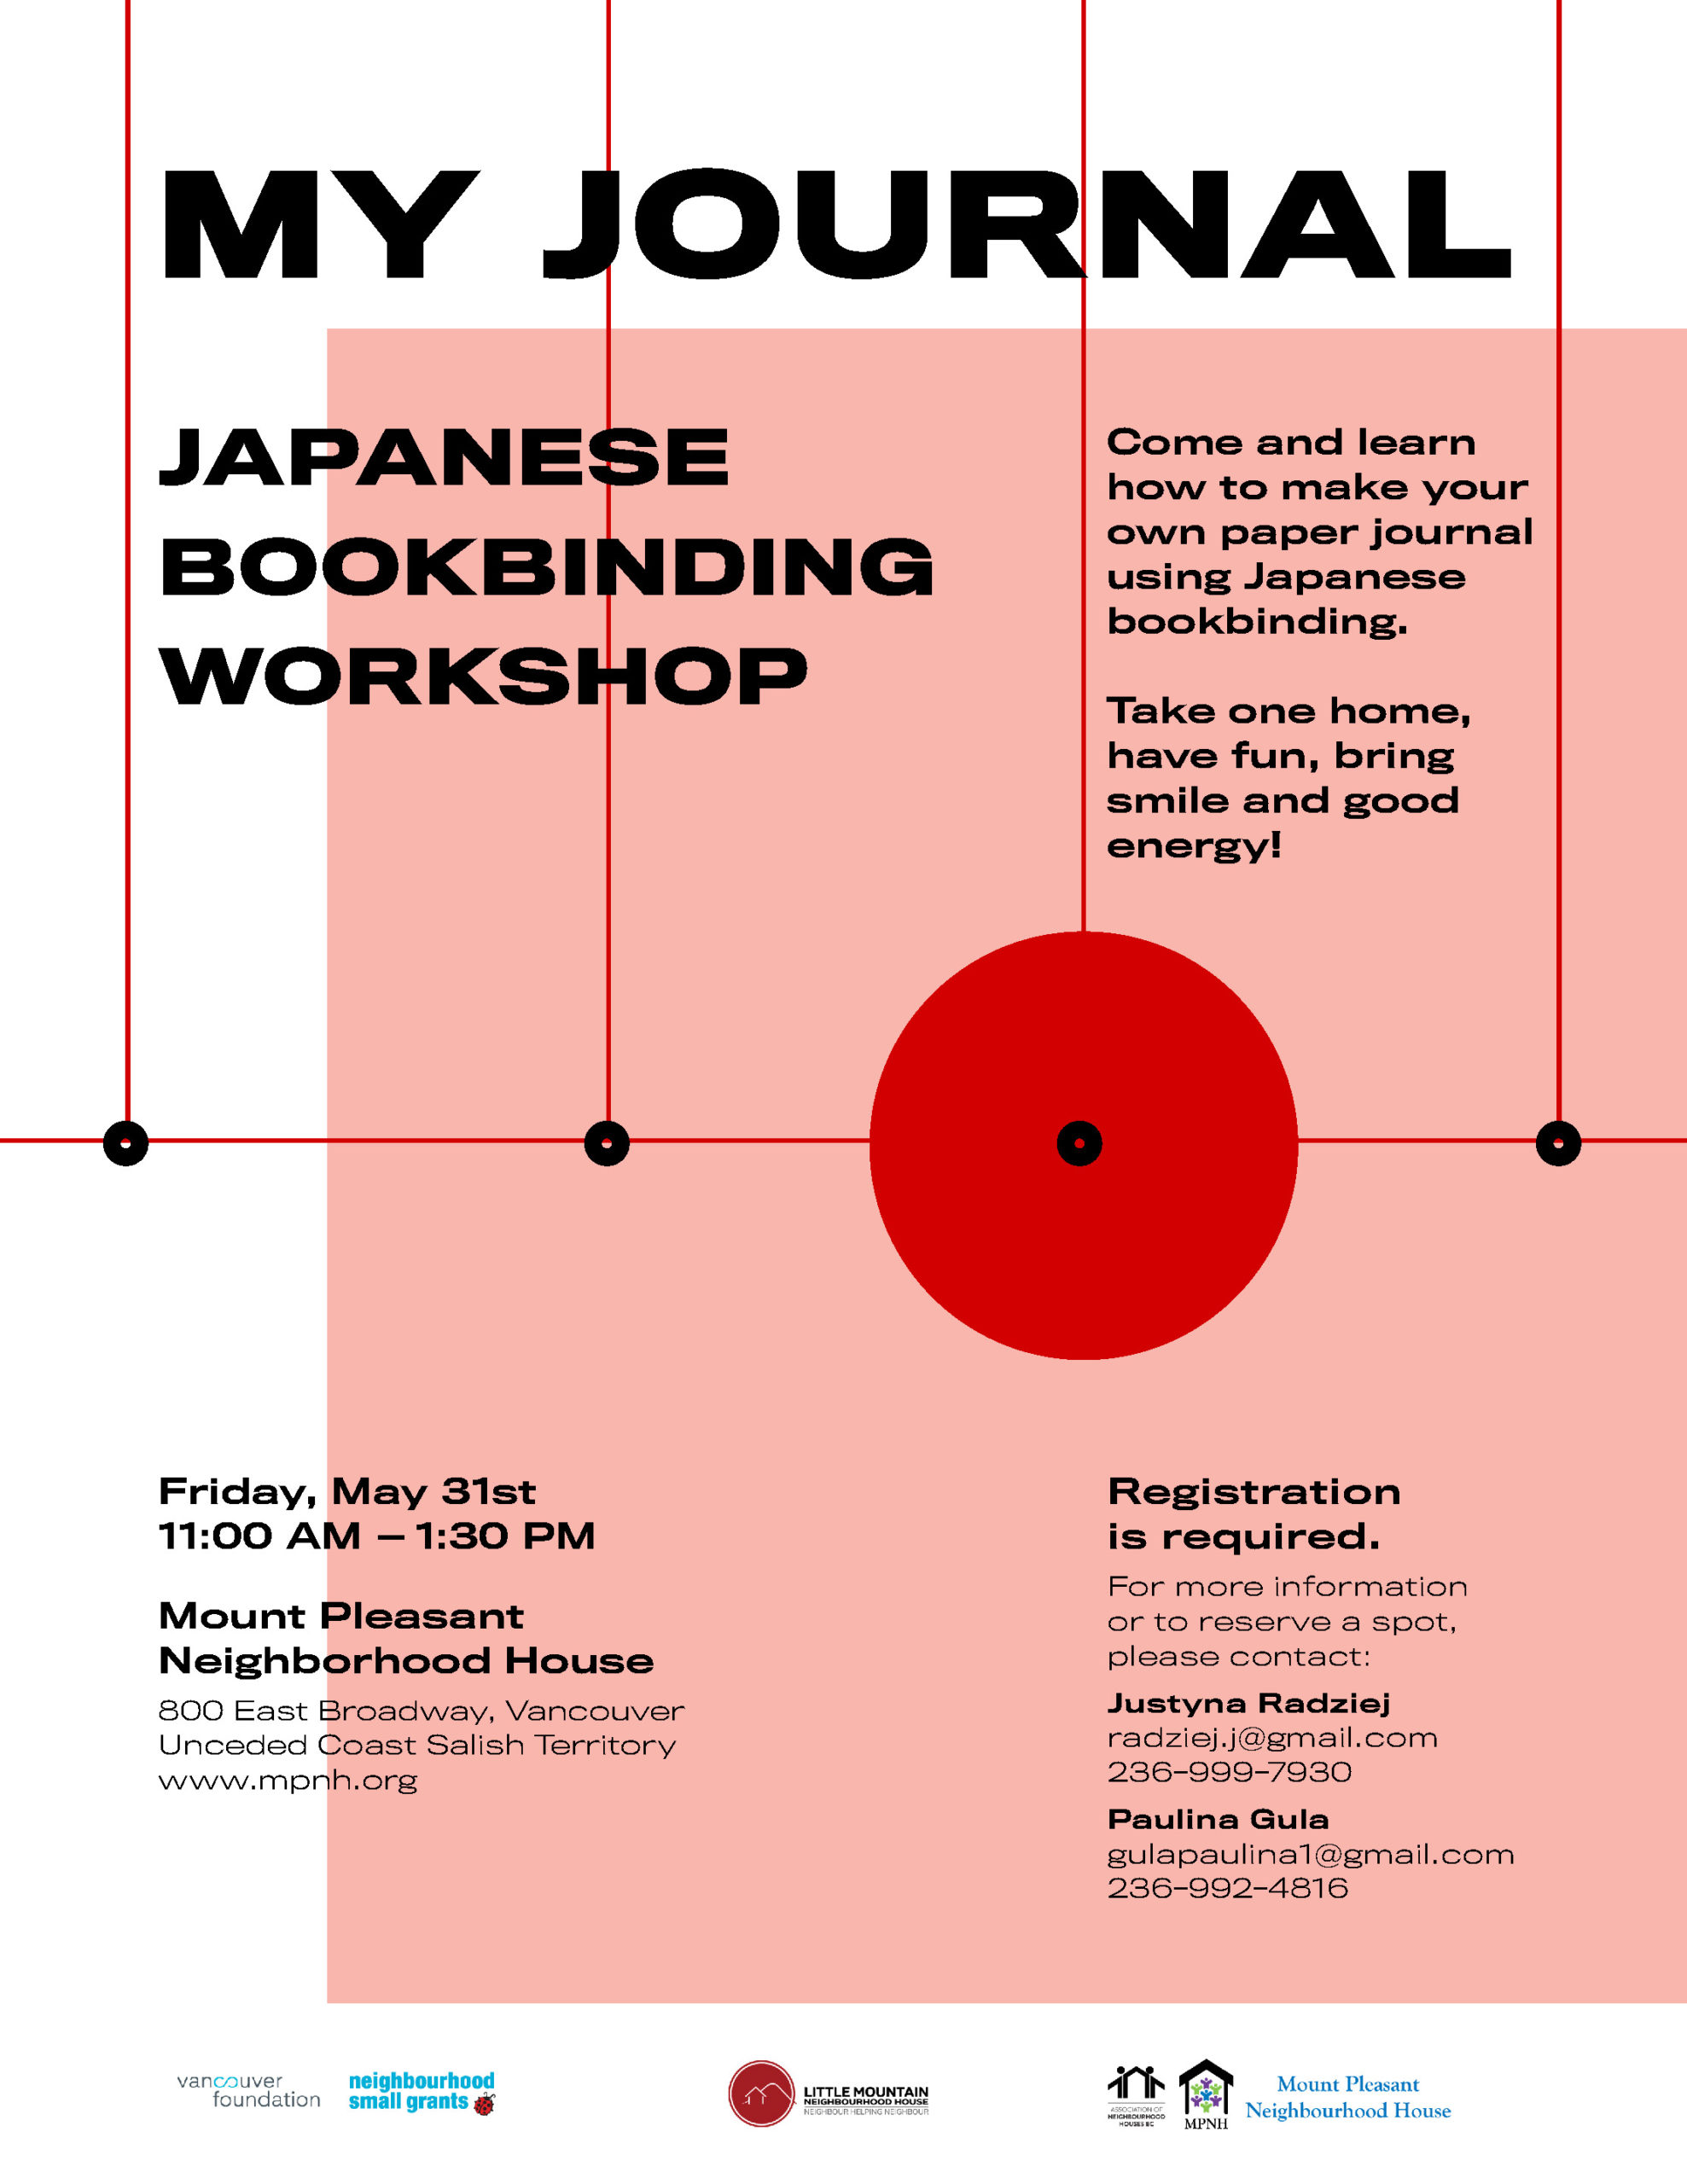 An image of the poster with event details, featuring a white background and a red circle, similar to the Japanese flag.